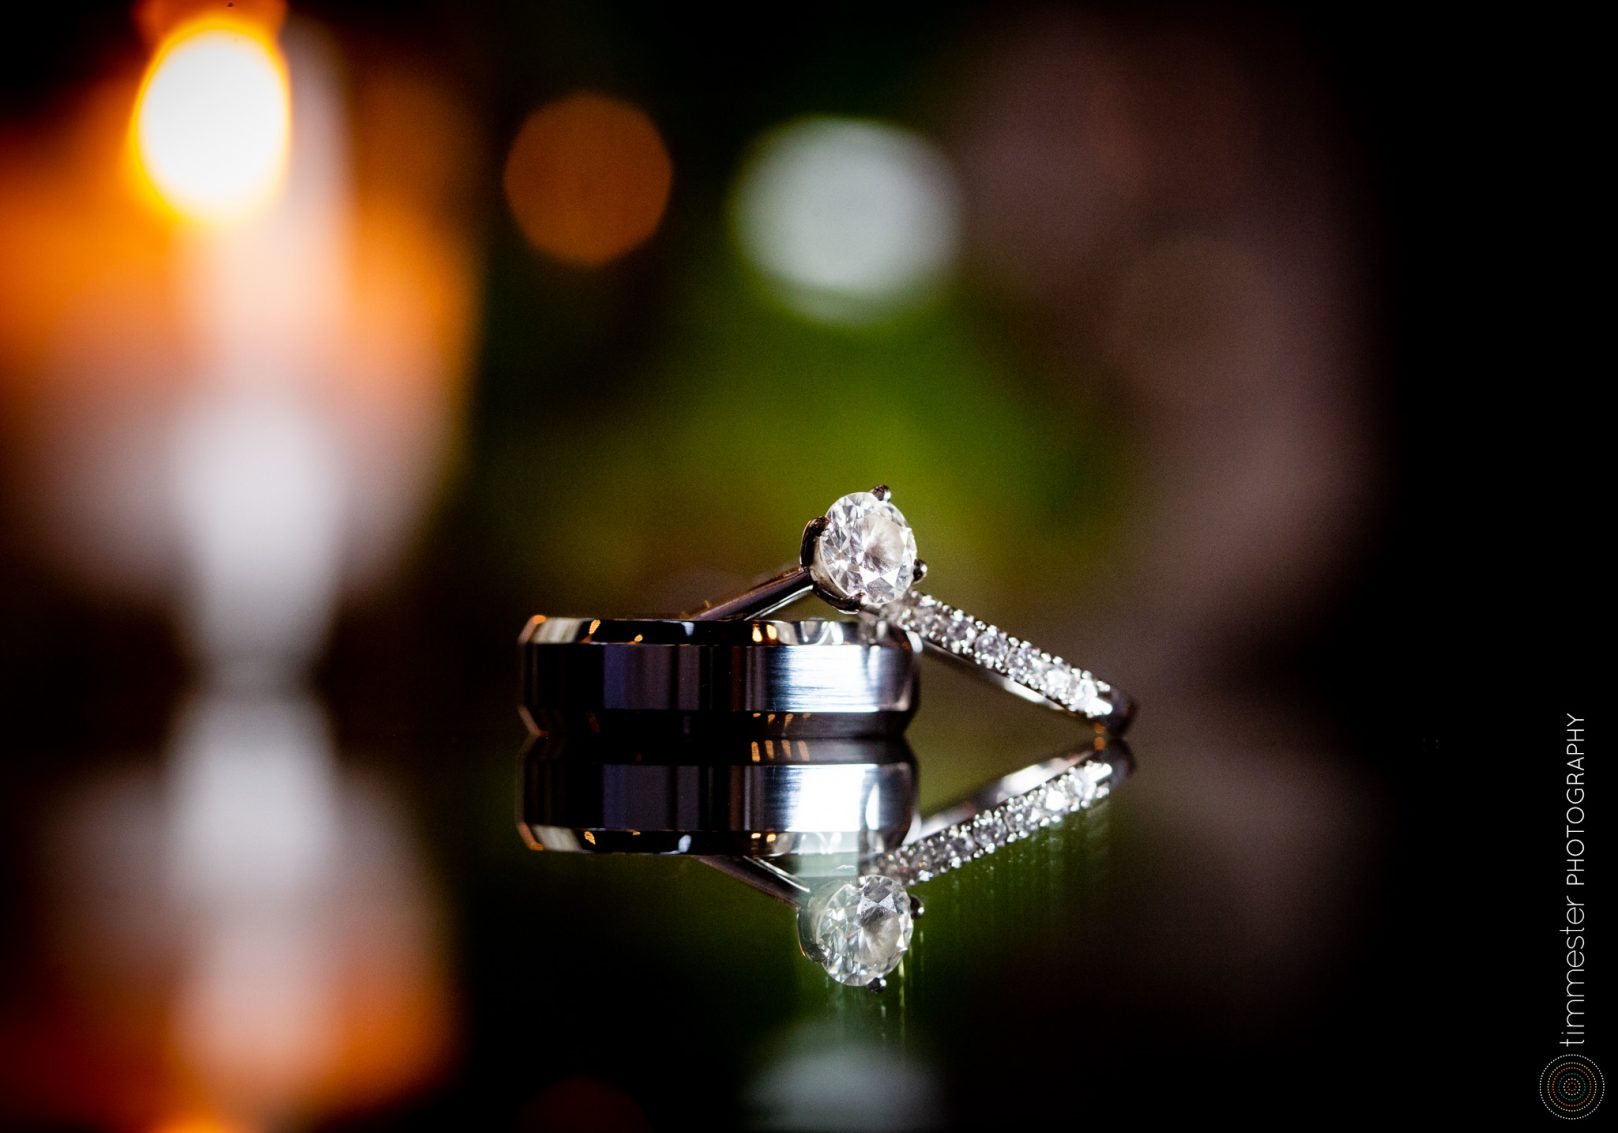 Jessica + David's wedding ring bling from their ceremony and reception at The Cotton Room in Durham, North Carolina.